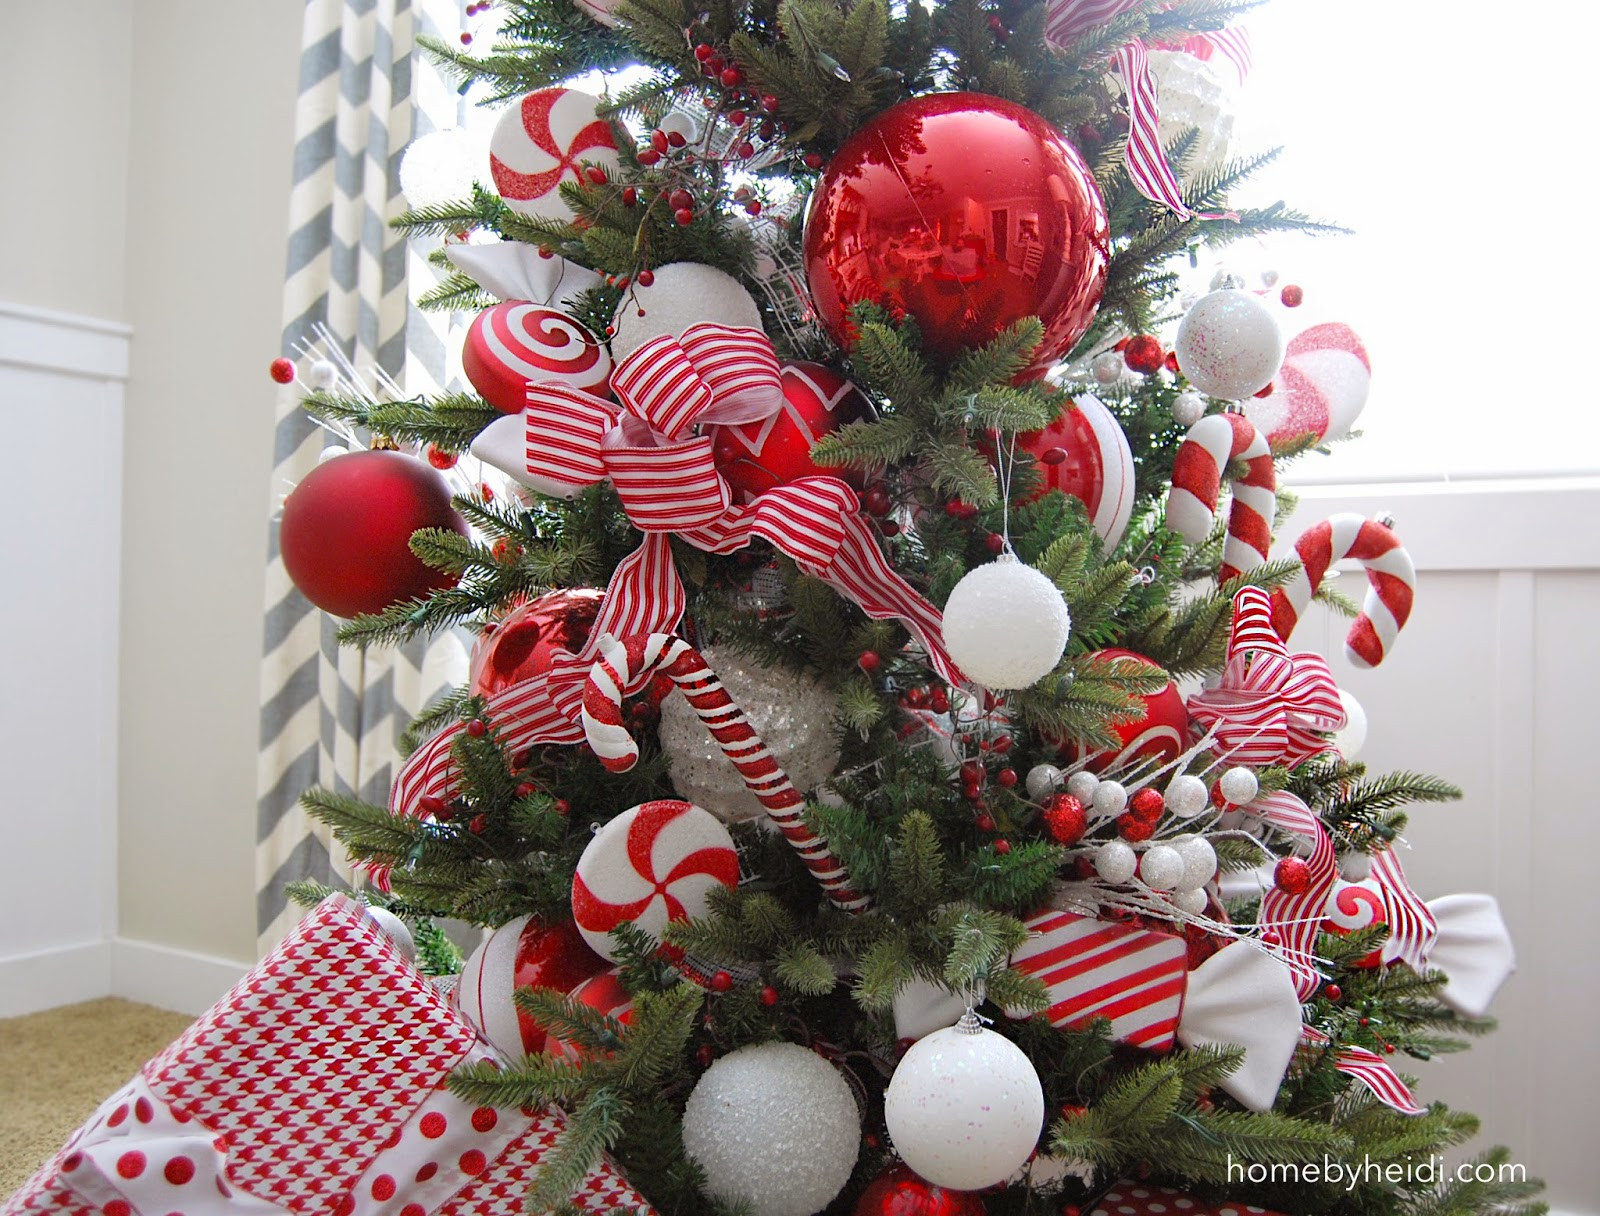 Candy Canes On Christmas Tree
 Home By Heidi Candy Cane Christmas Tree